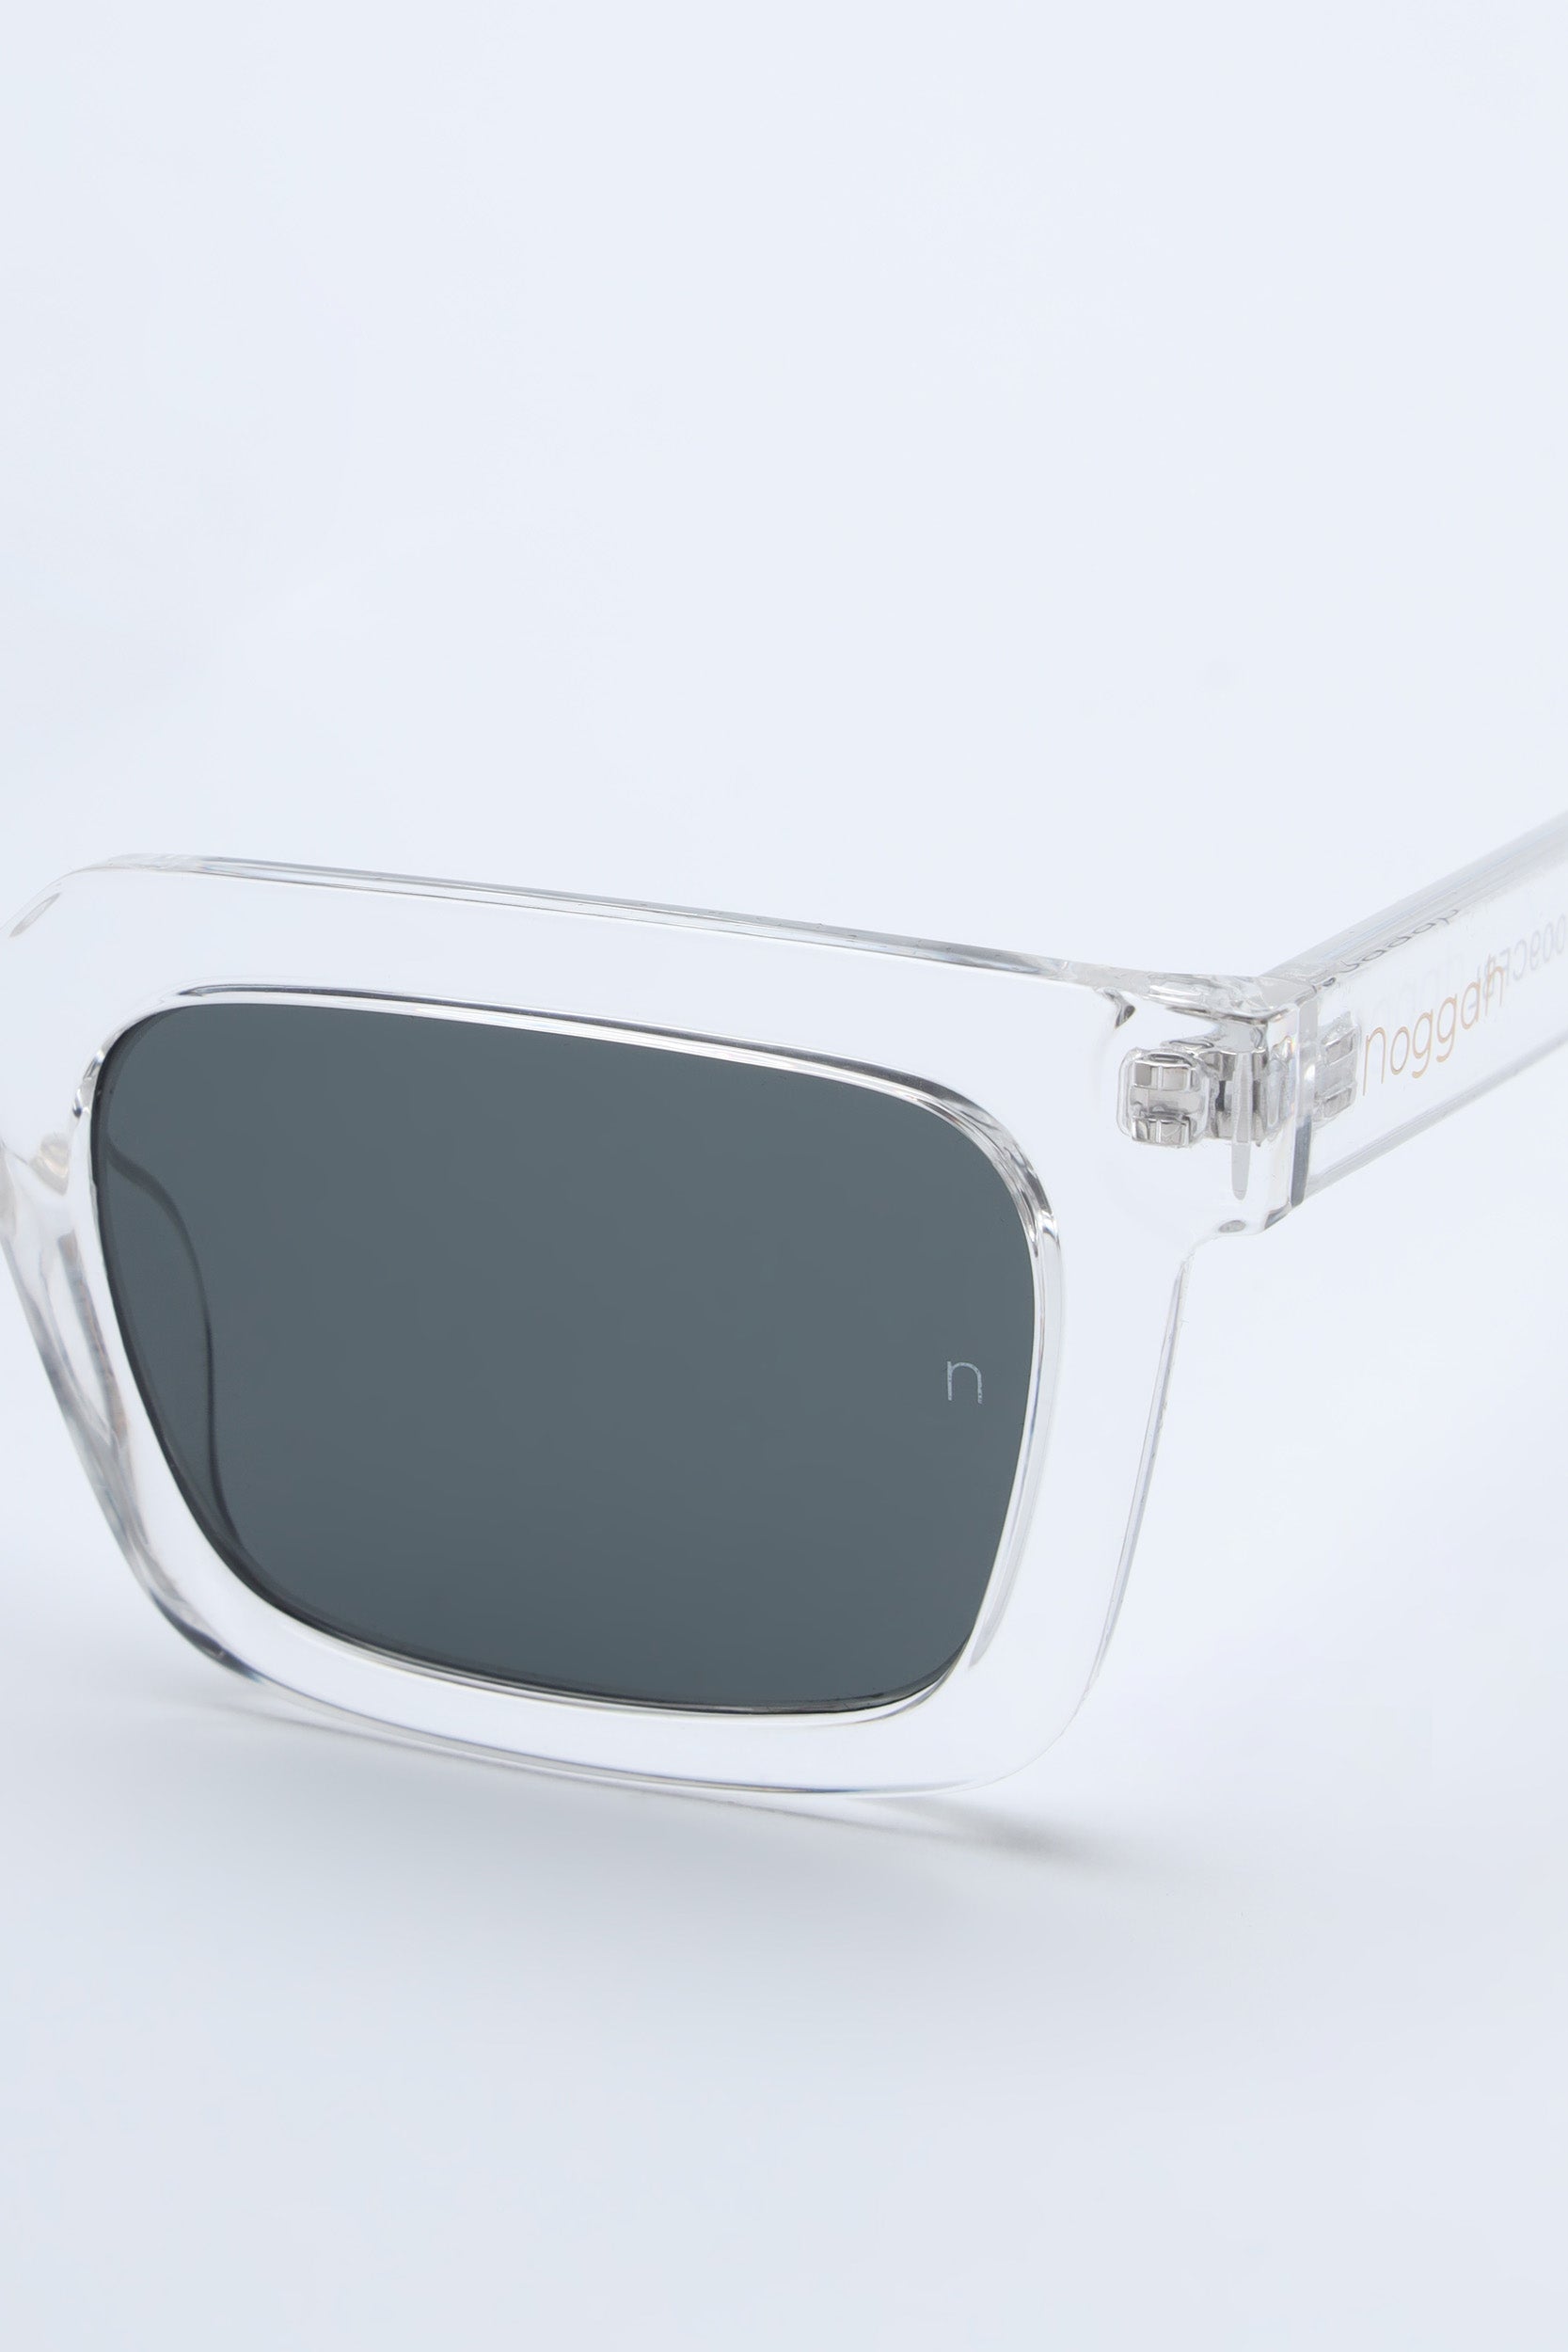 NS1009CFBL PC Clear Frame with Black Glass Lens Sunglasses